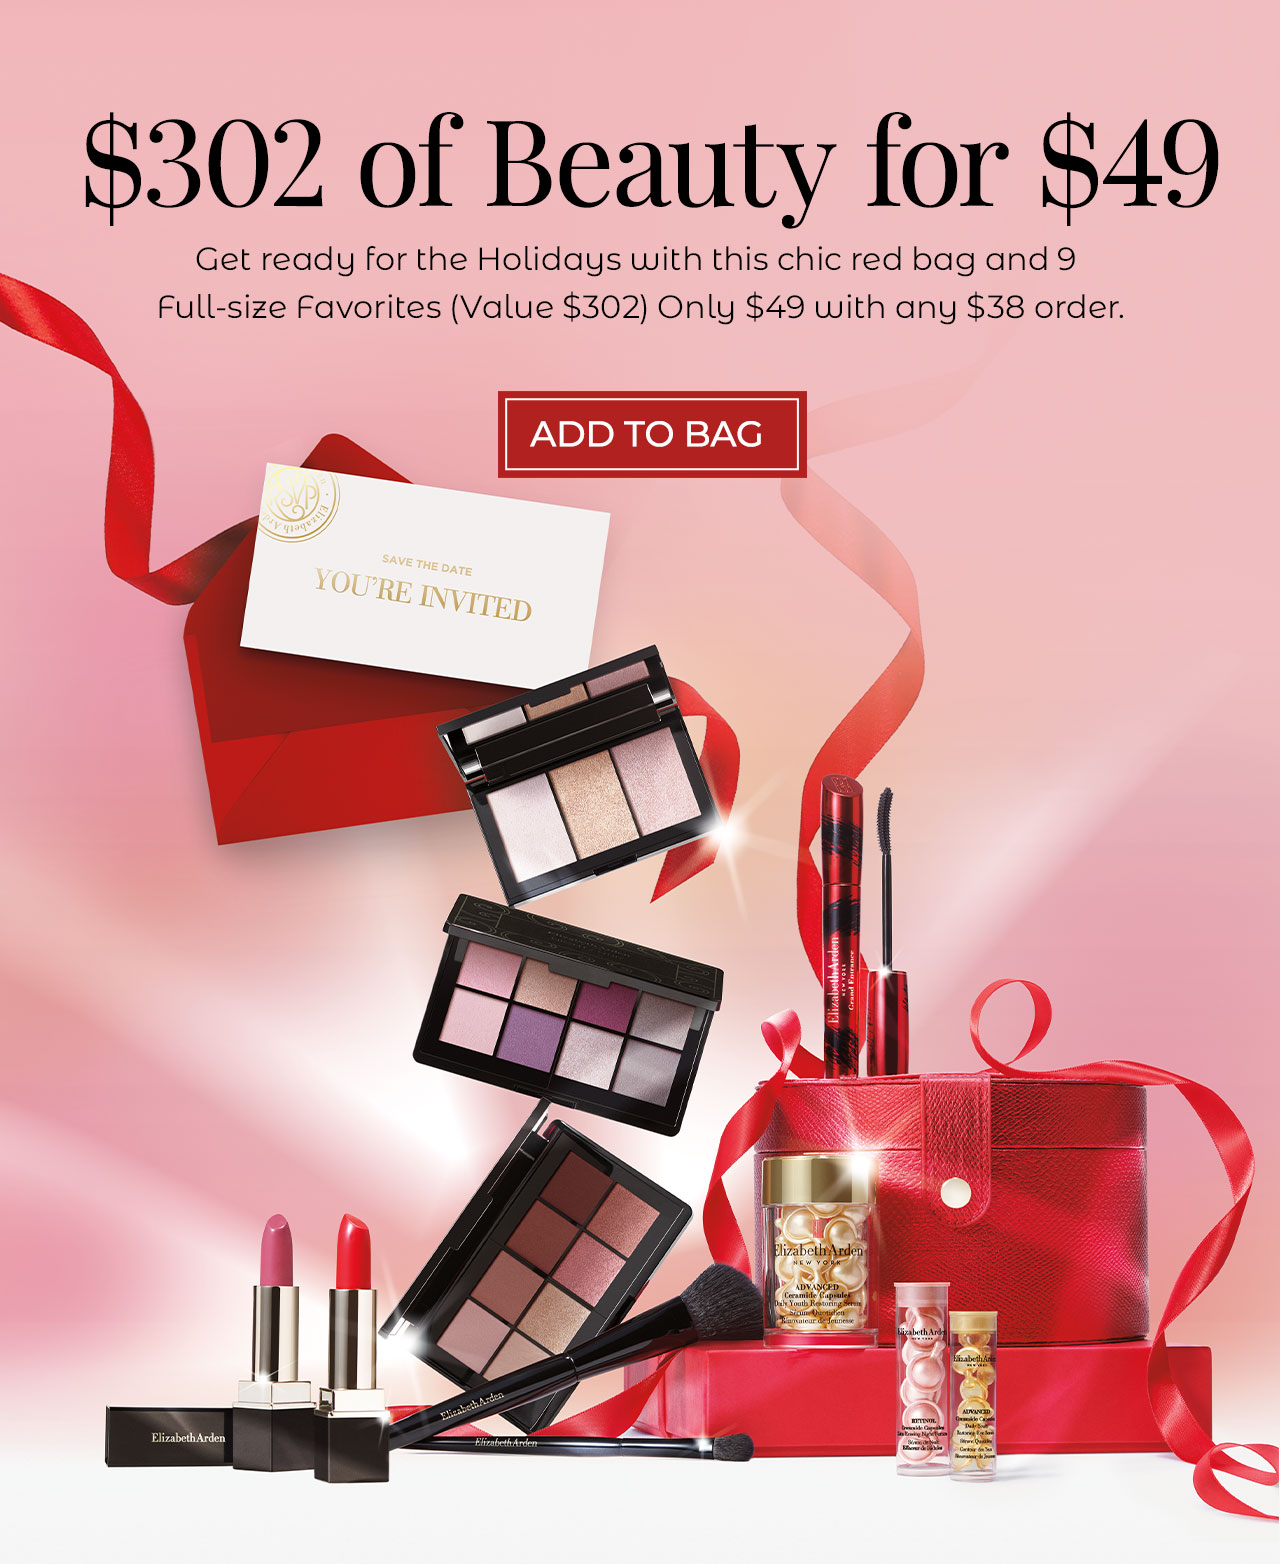 $302 of Beauty for $49 | Get ready for the Holidays with this chic red bag and 9 Full-size Favorites (Value $302) Only $49 with any $38 order. | Add to Bag